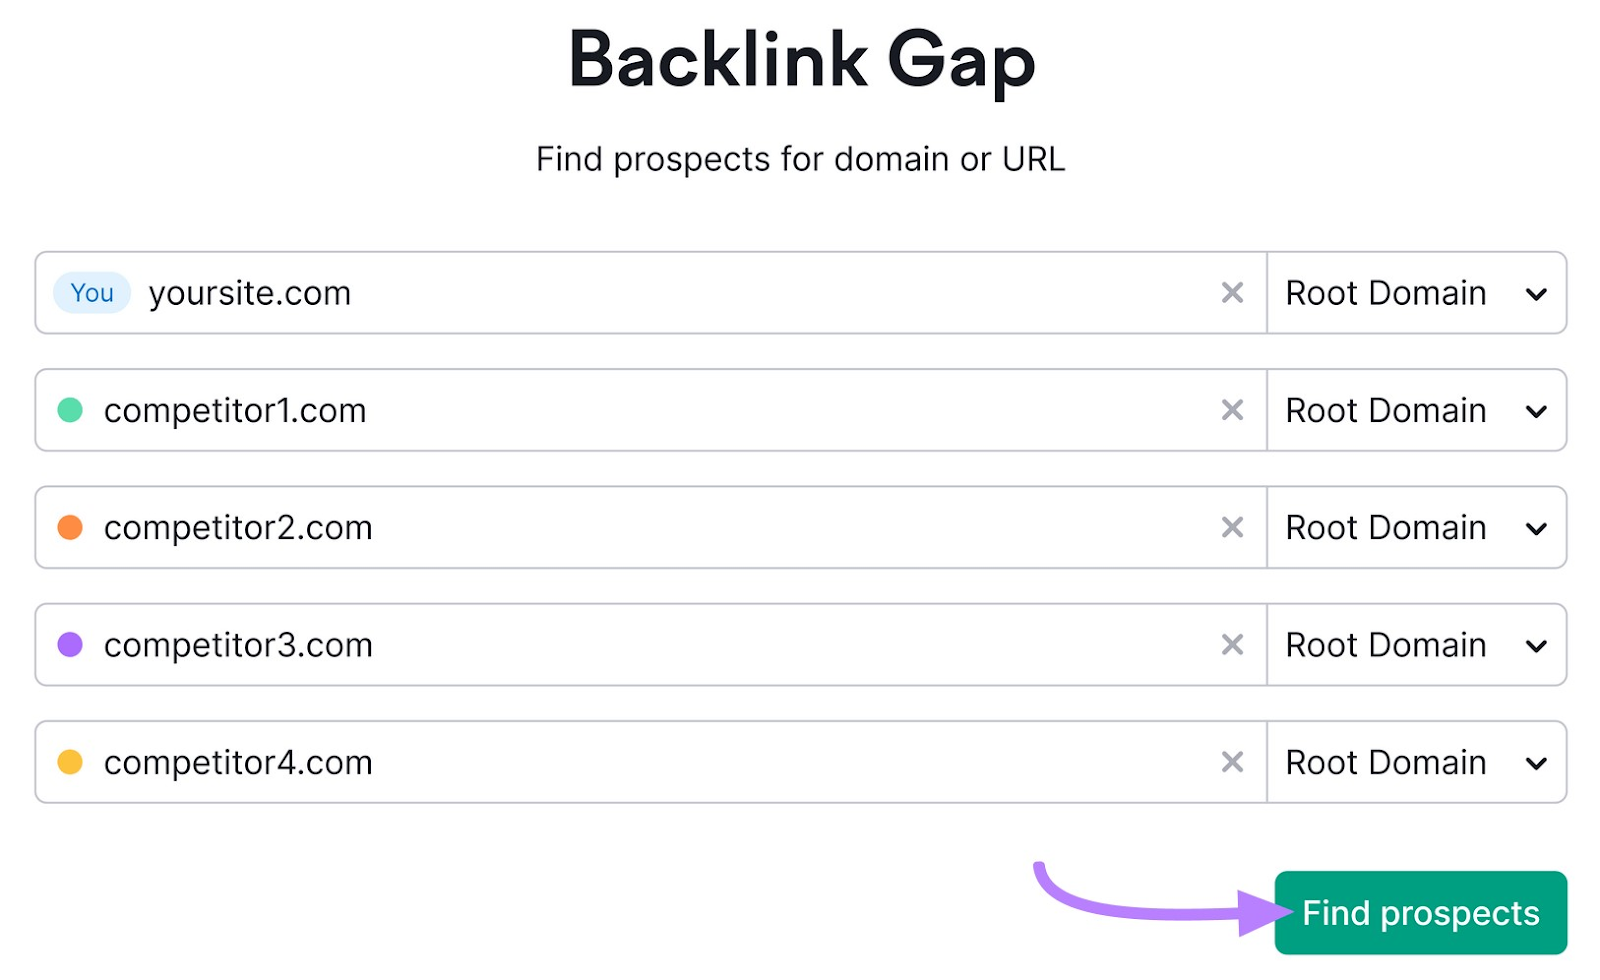 search for your and your competitors domains in Backlink Gap tool to find sites that link to competitors but not to you